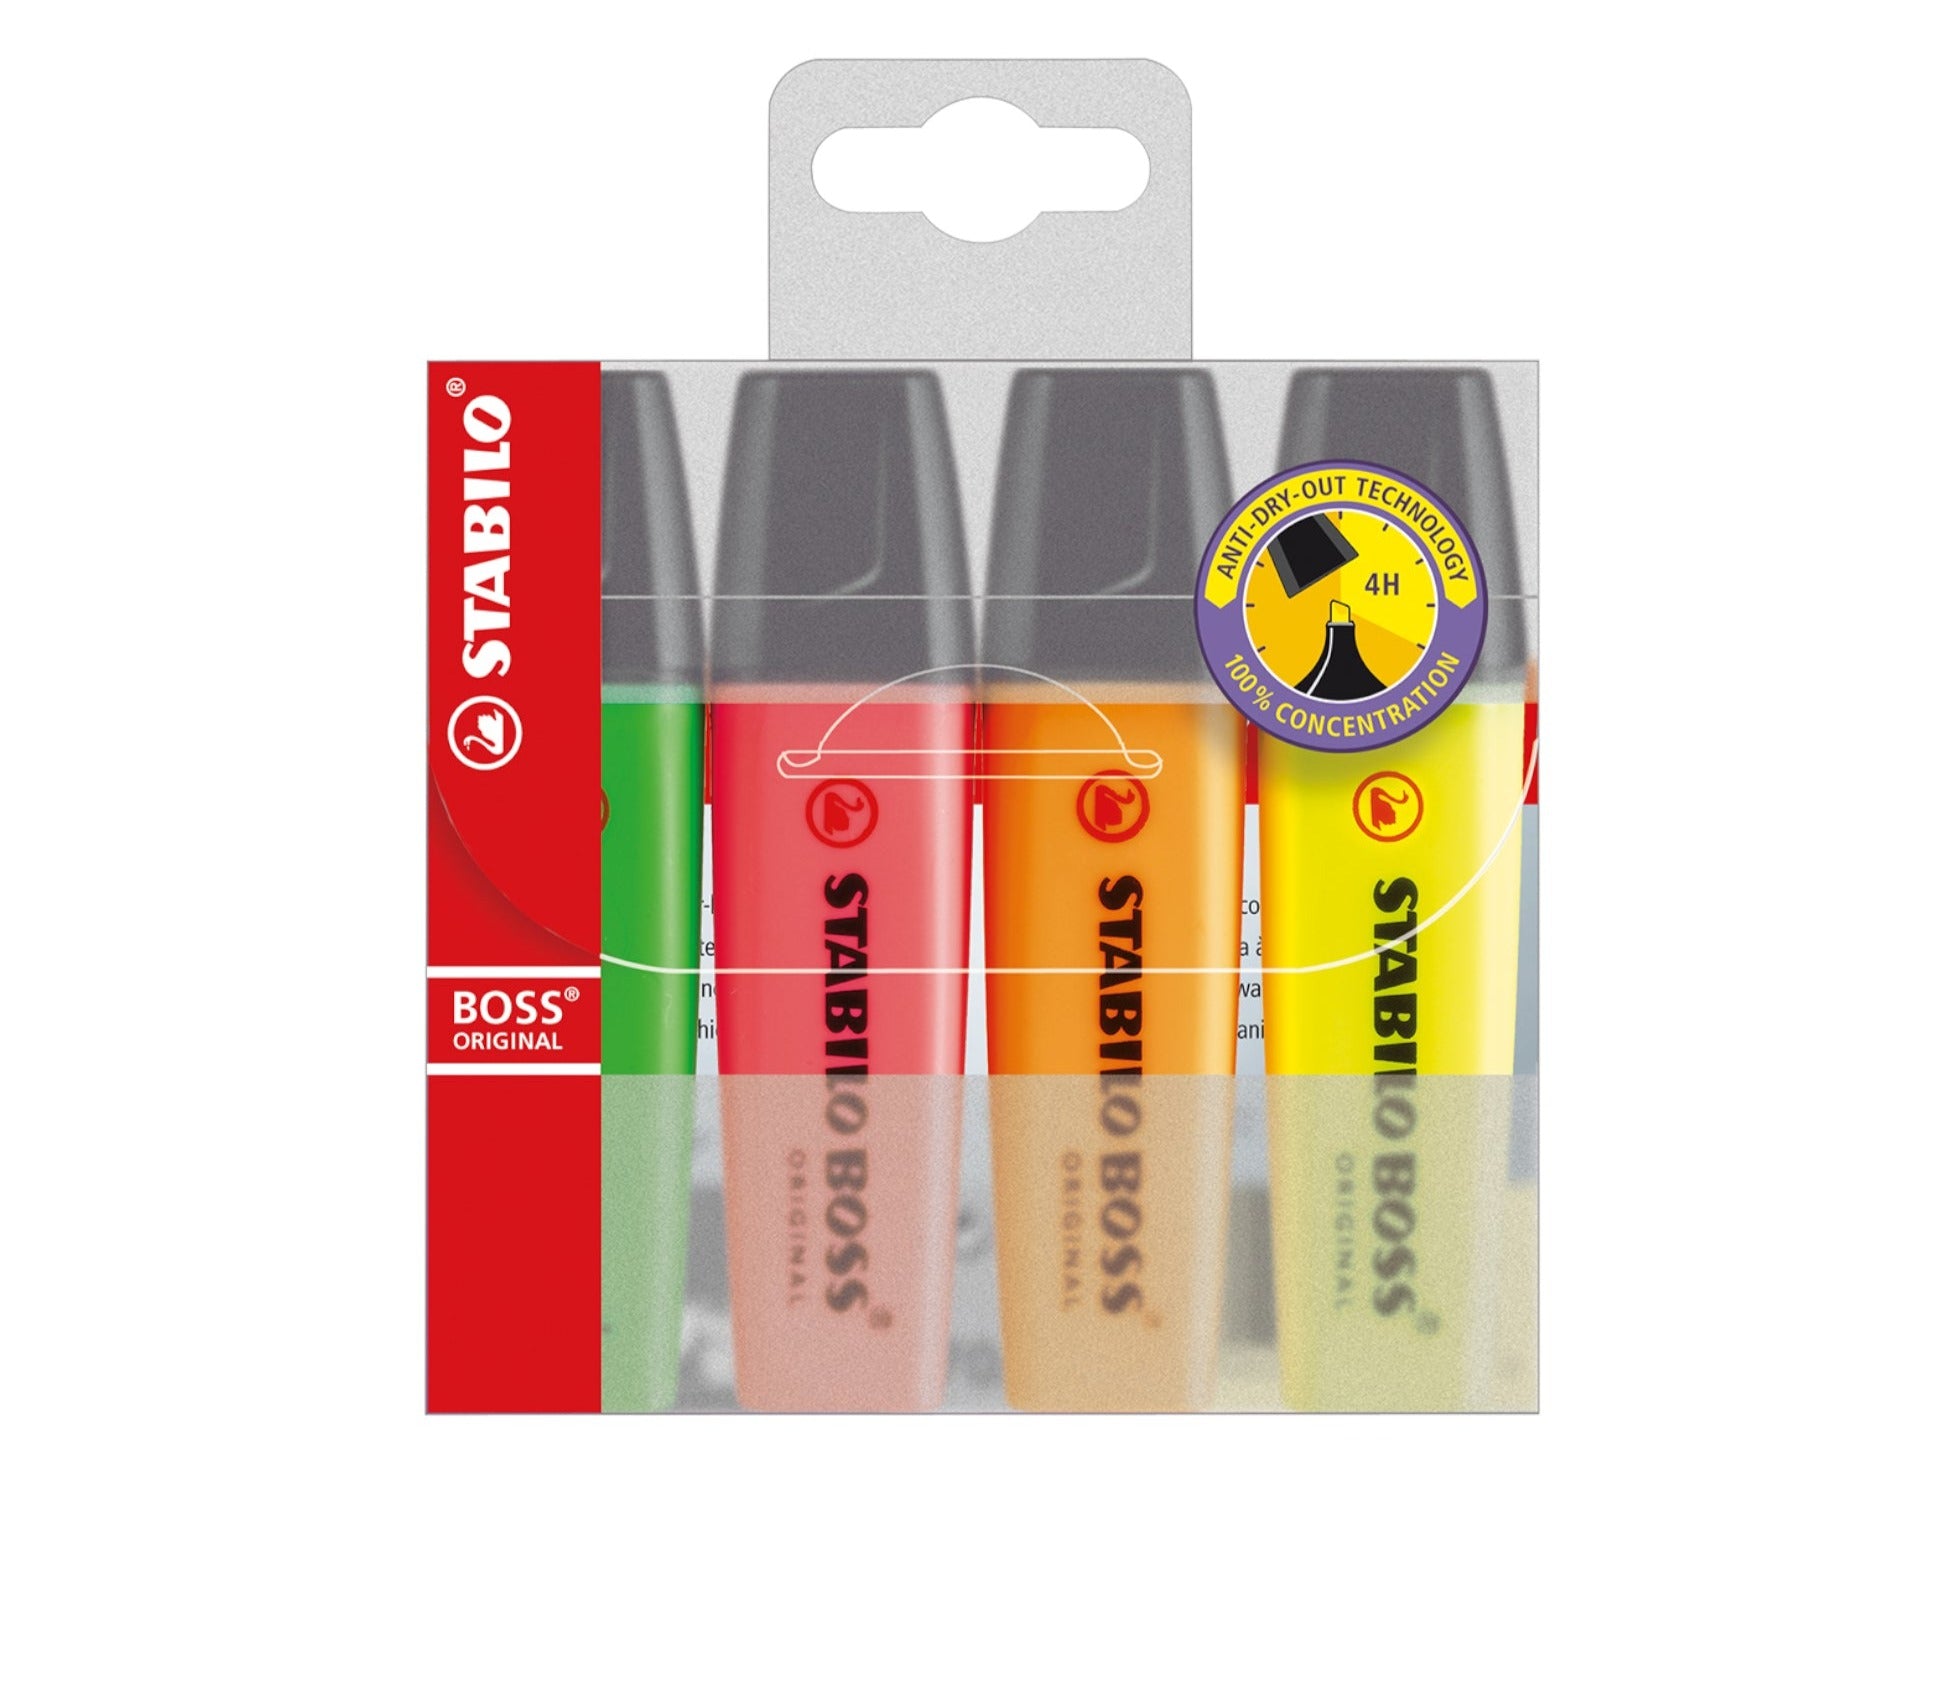 STABILO BOSS Original Highlighter Pen and Text Marker- Set of 4 - Schwan-STABILO -Most colourful Stationery Shop